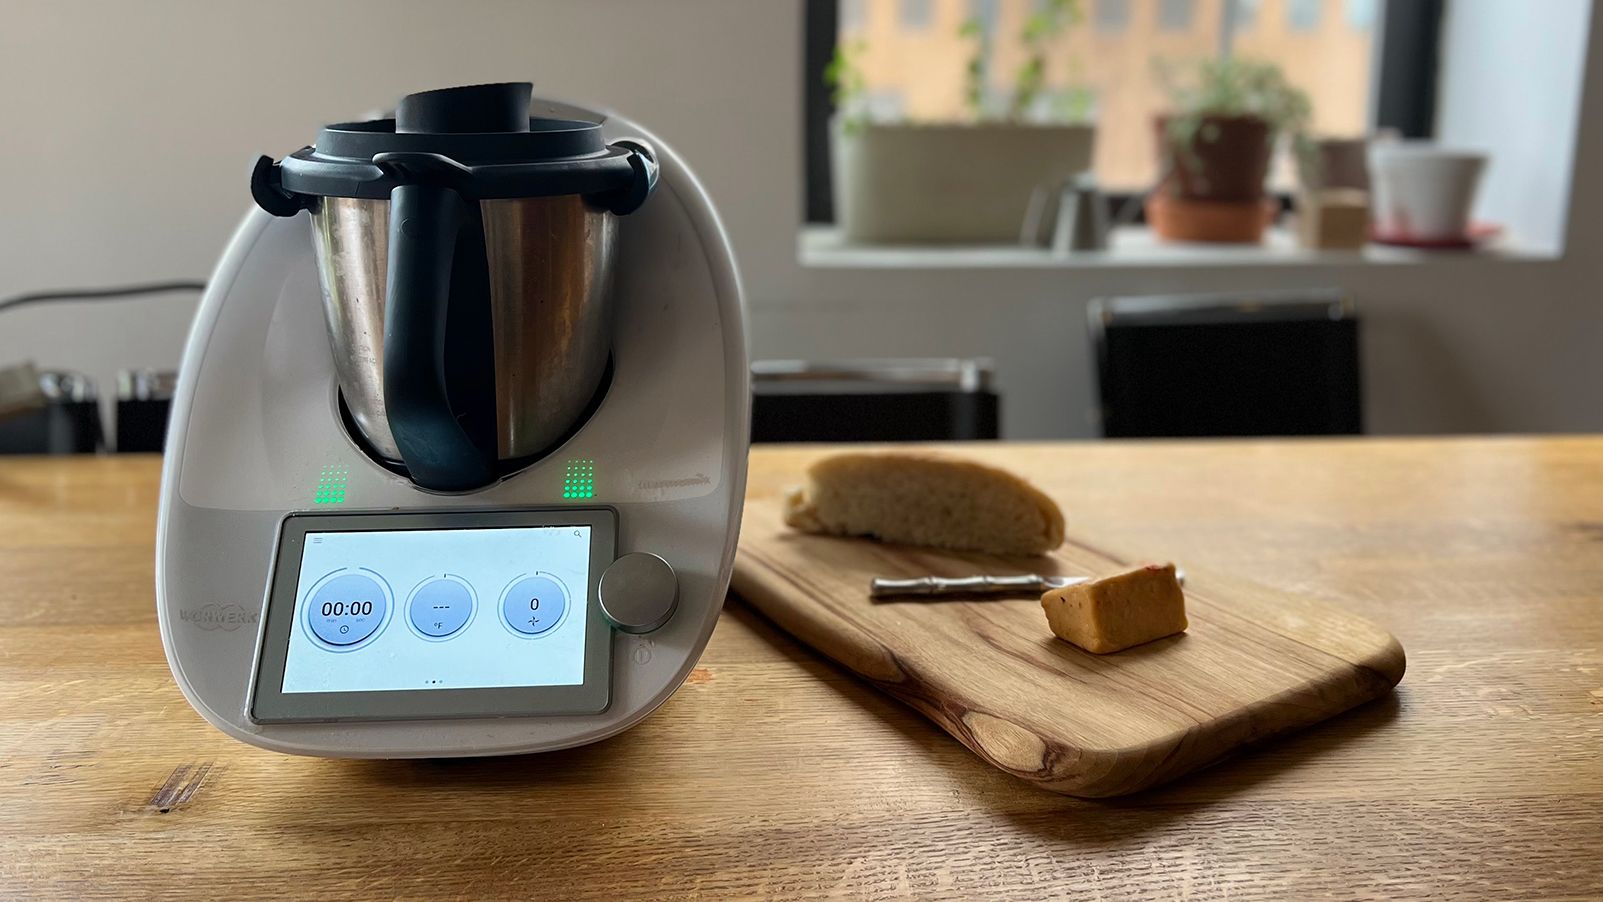 What Is a Thermomix All-in-One Cooker?